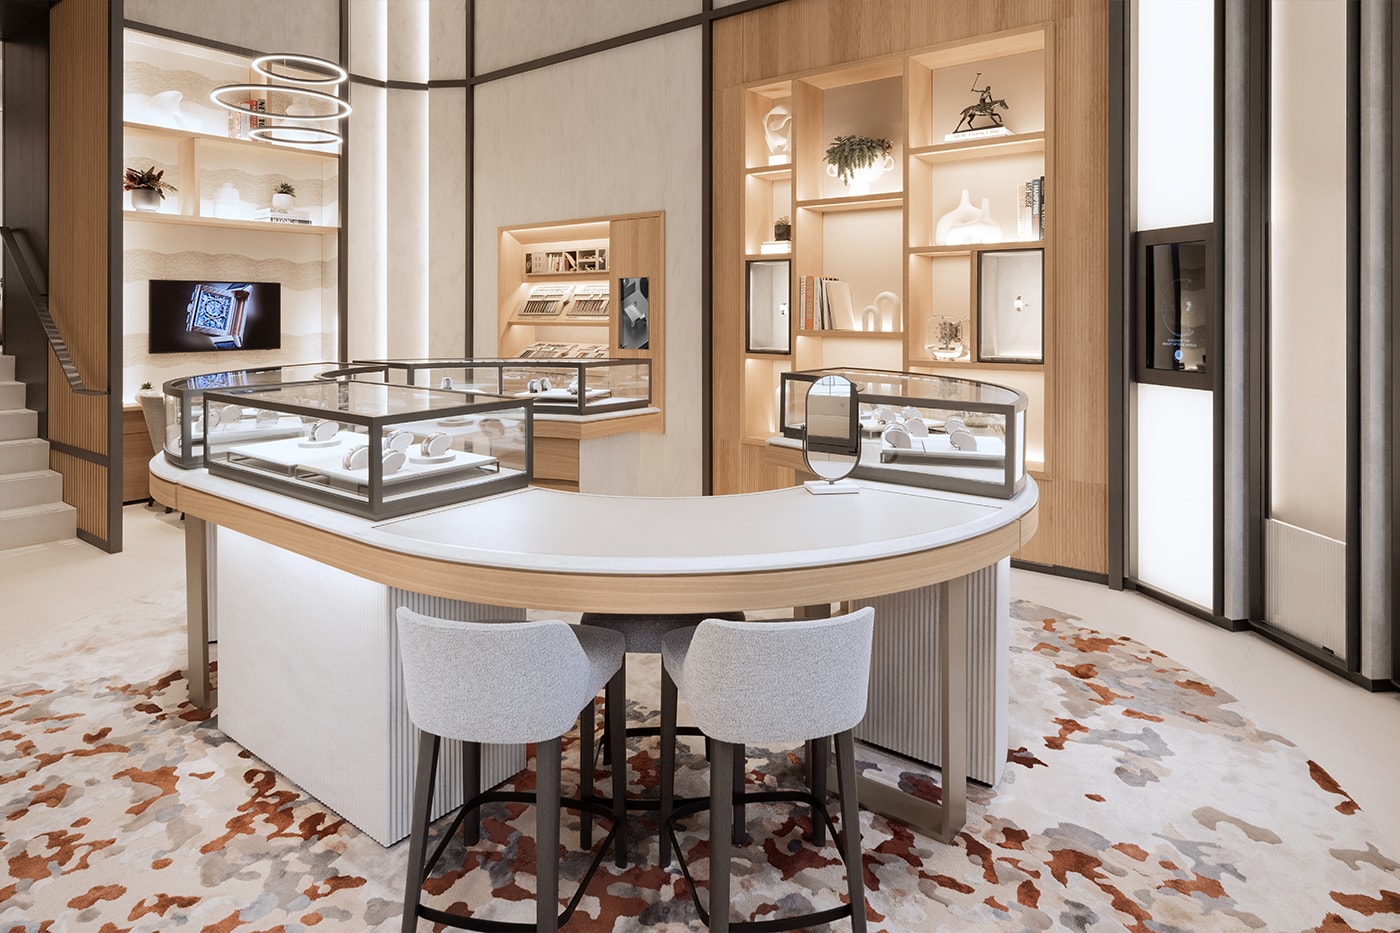 Jaeger-LeCoultre  Flagship Boutique New York Opening Info